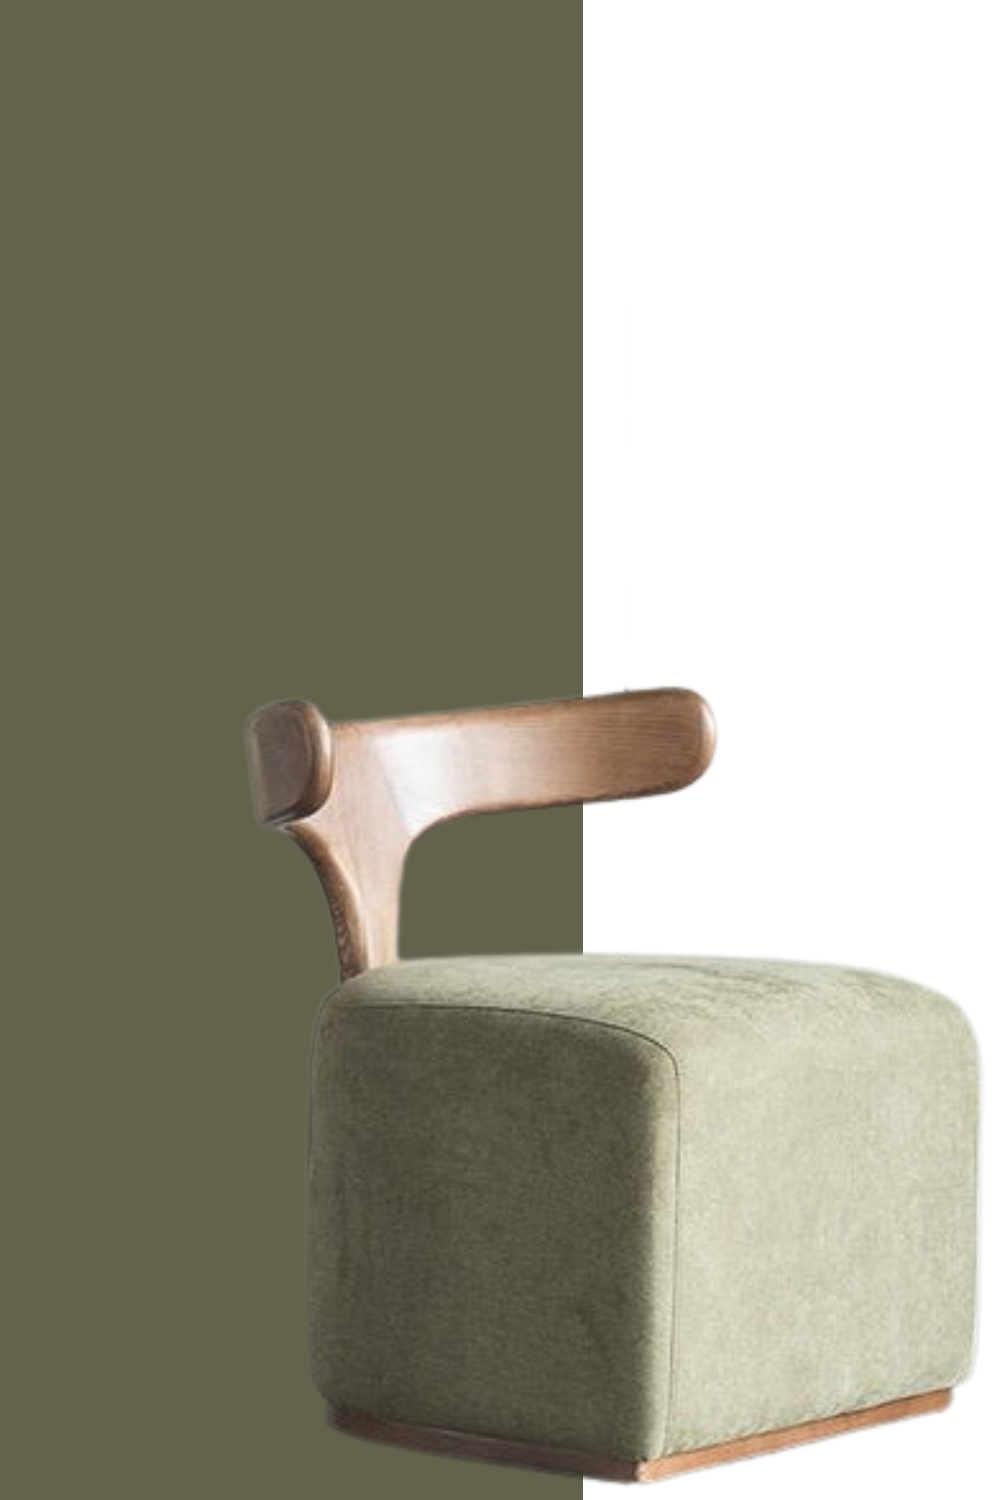 kleio accent chair with sage green upholstered seat and wooden back and base